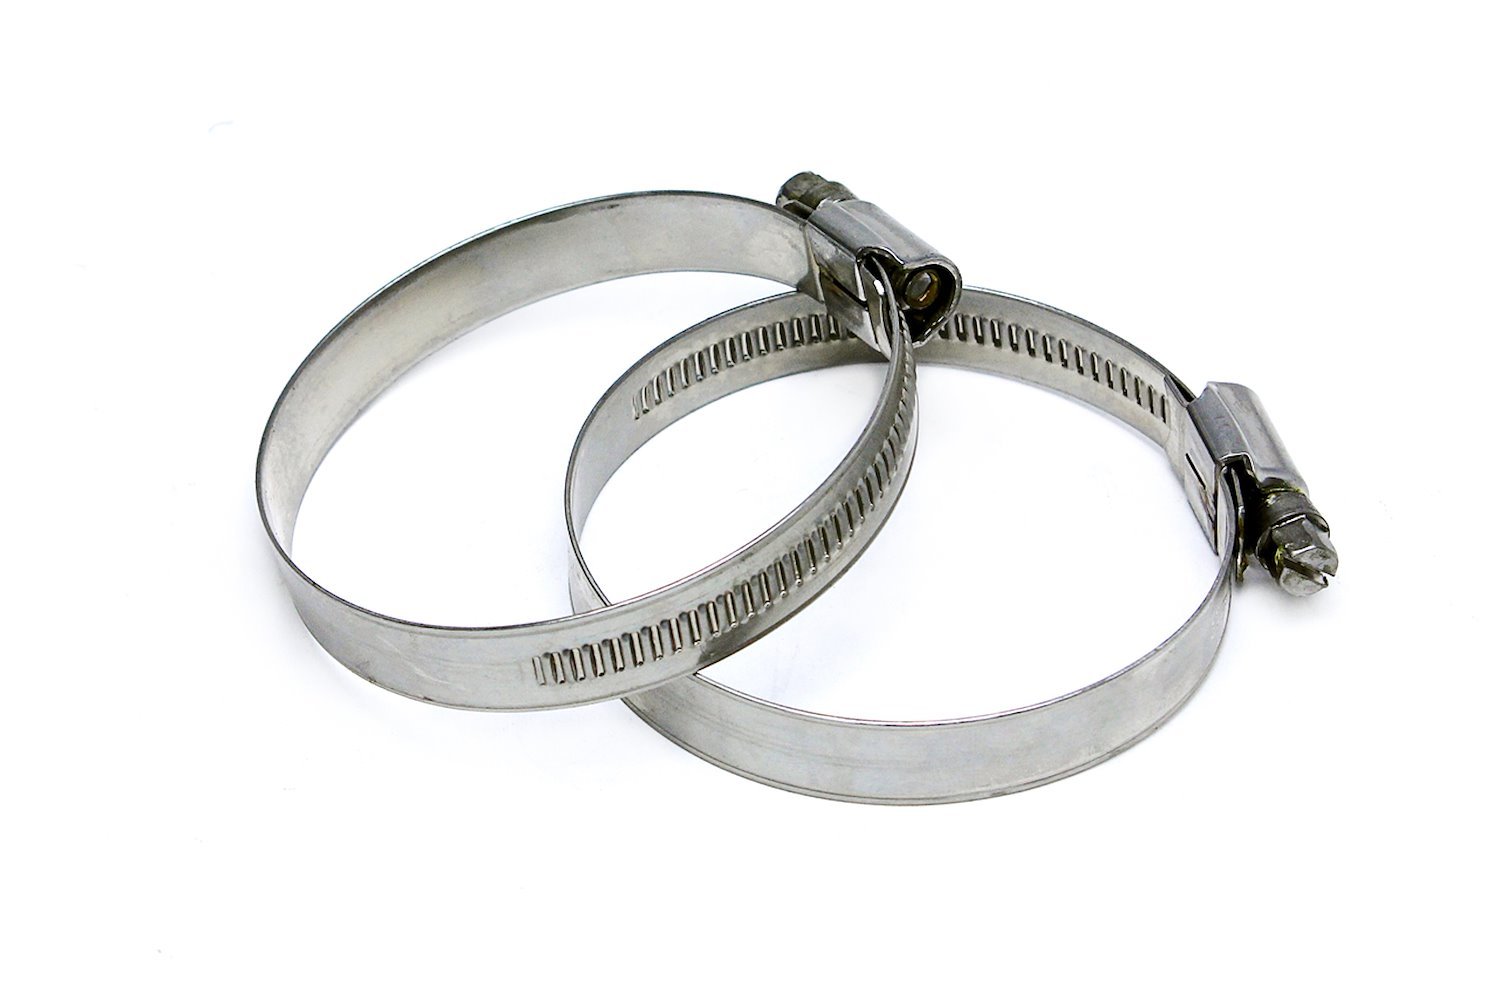 EMSC-50-70x2 Embossed Hose Clamp, Stainless Steel Embossed Hose Clamp, Size #40, Effective Range: 2 in.- 3 in., 2Pc